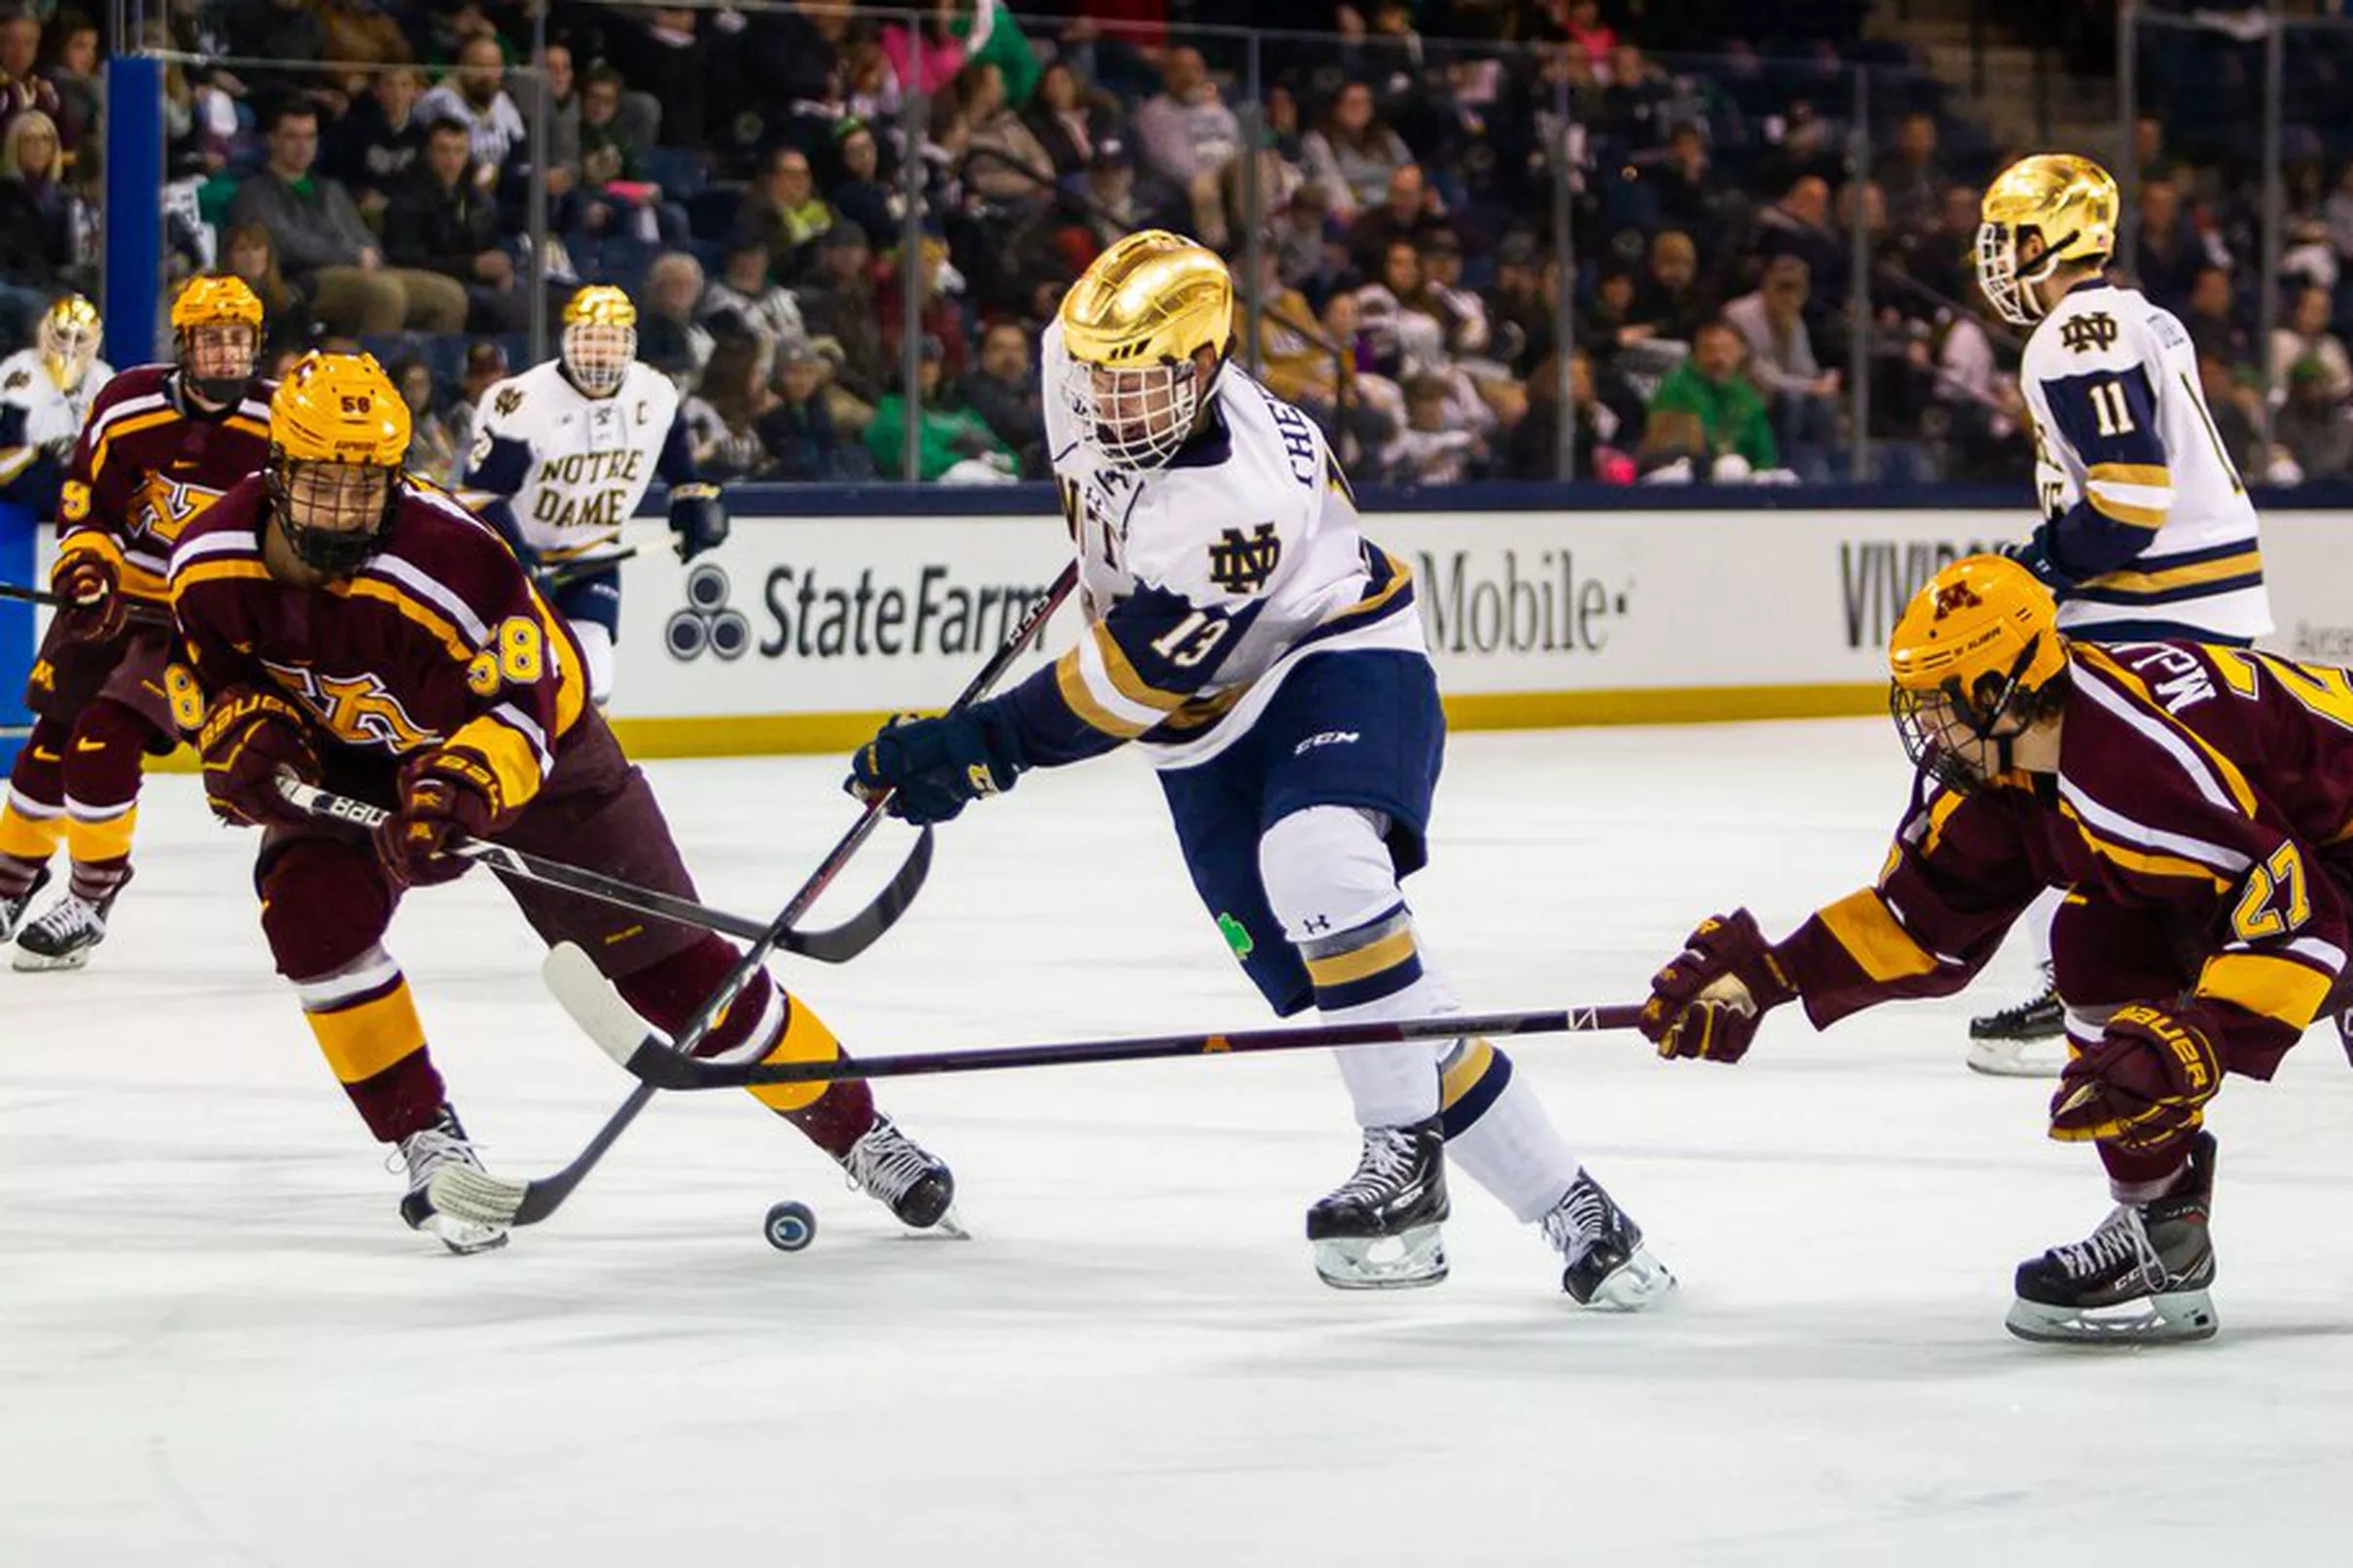 Notre Dame Hockey Irish Get it Done in Overtime to Earn Spot in Big